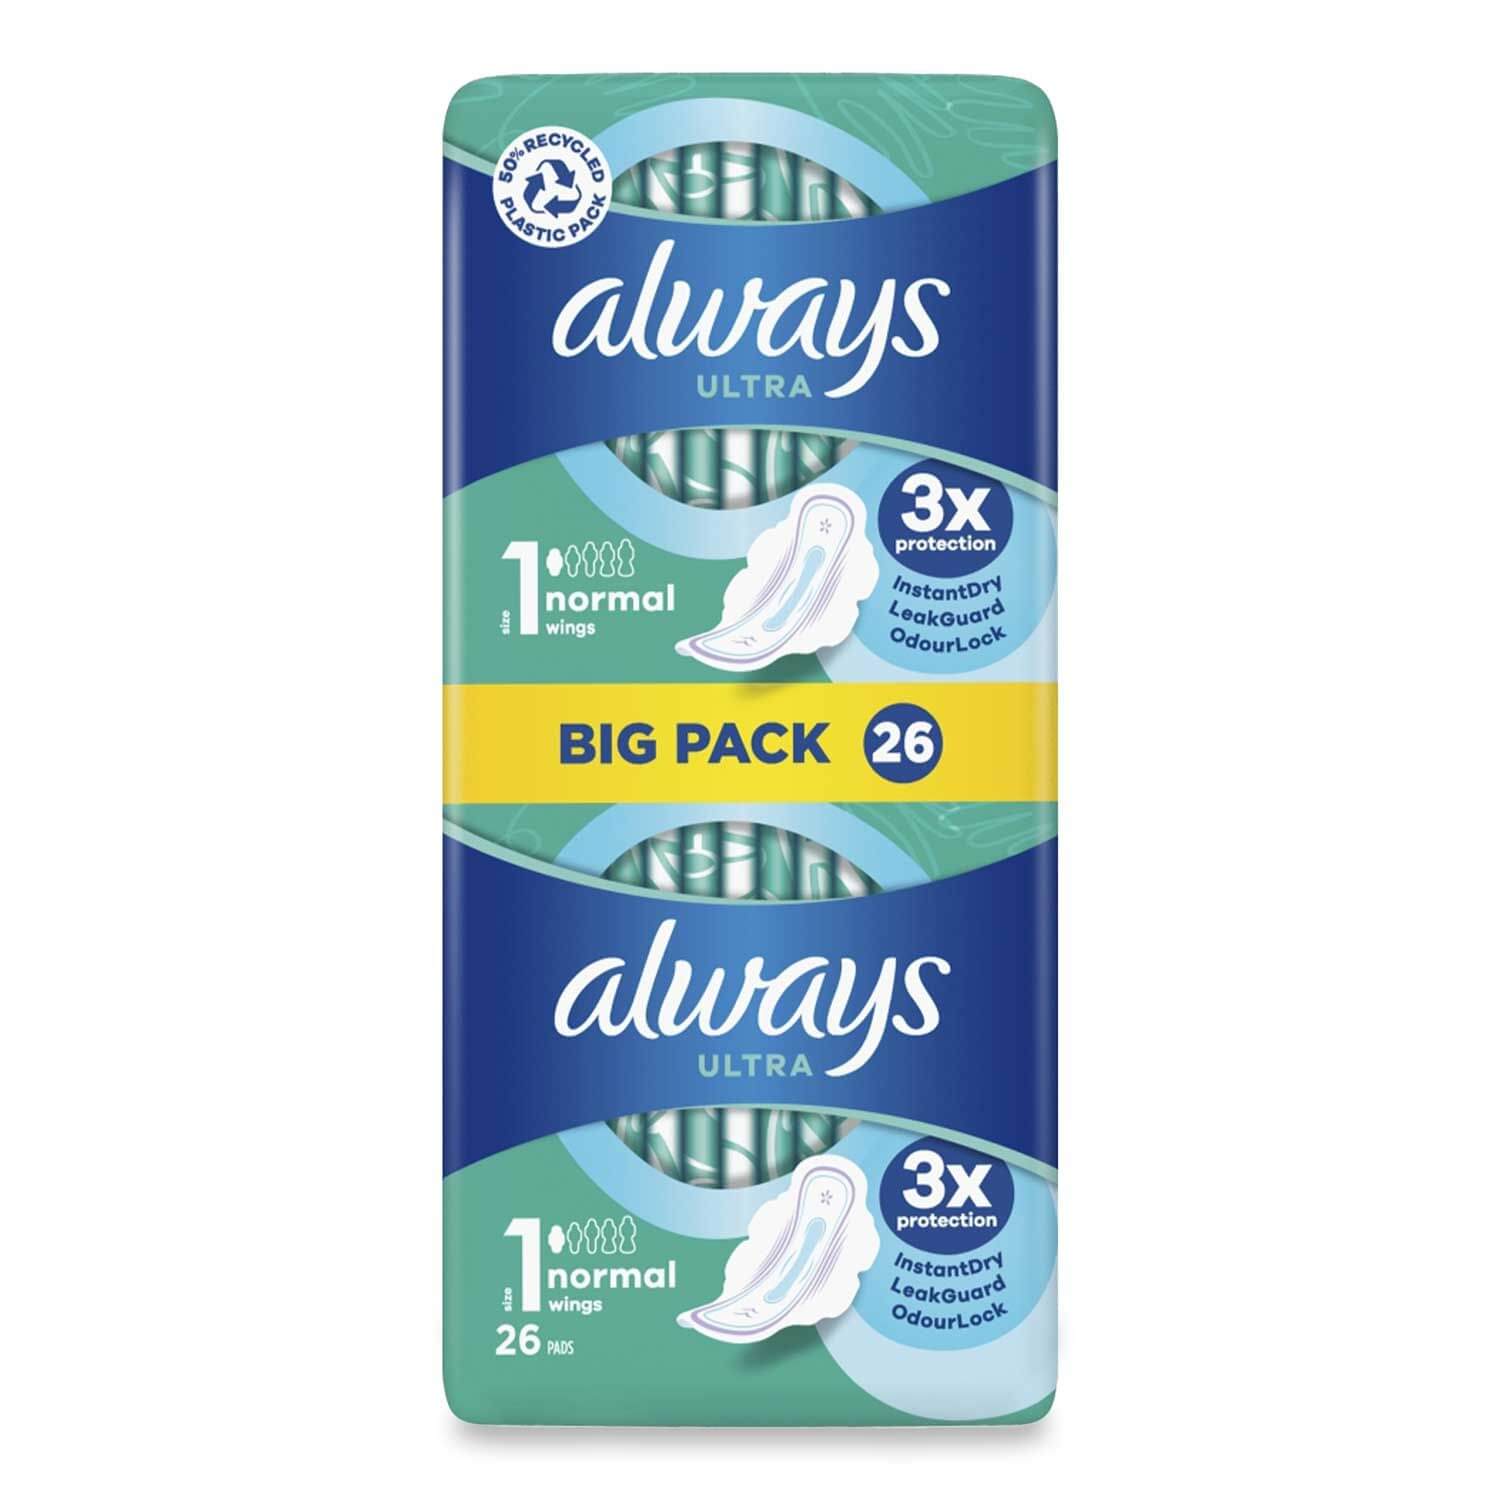 Always Ultra Normal Duo Pack 26s